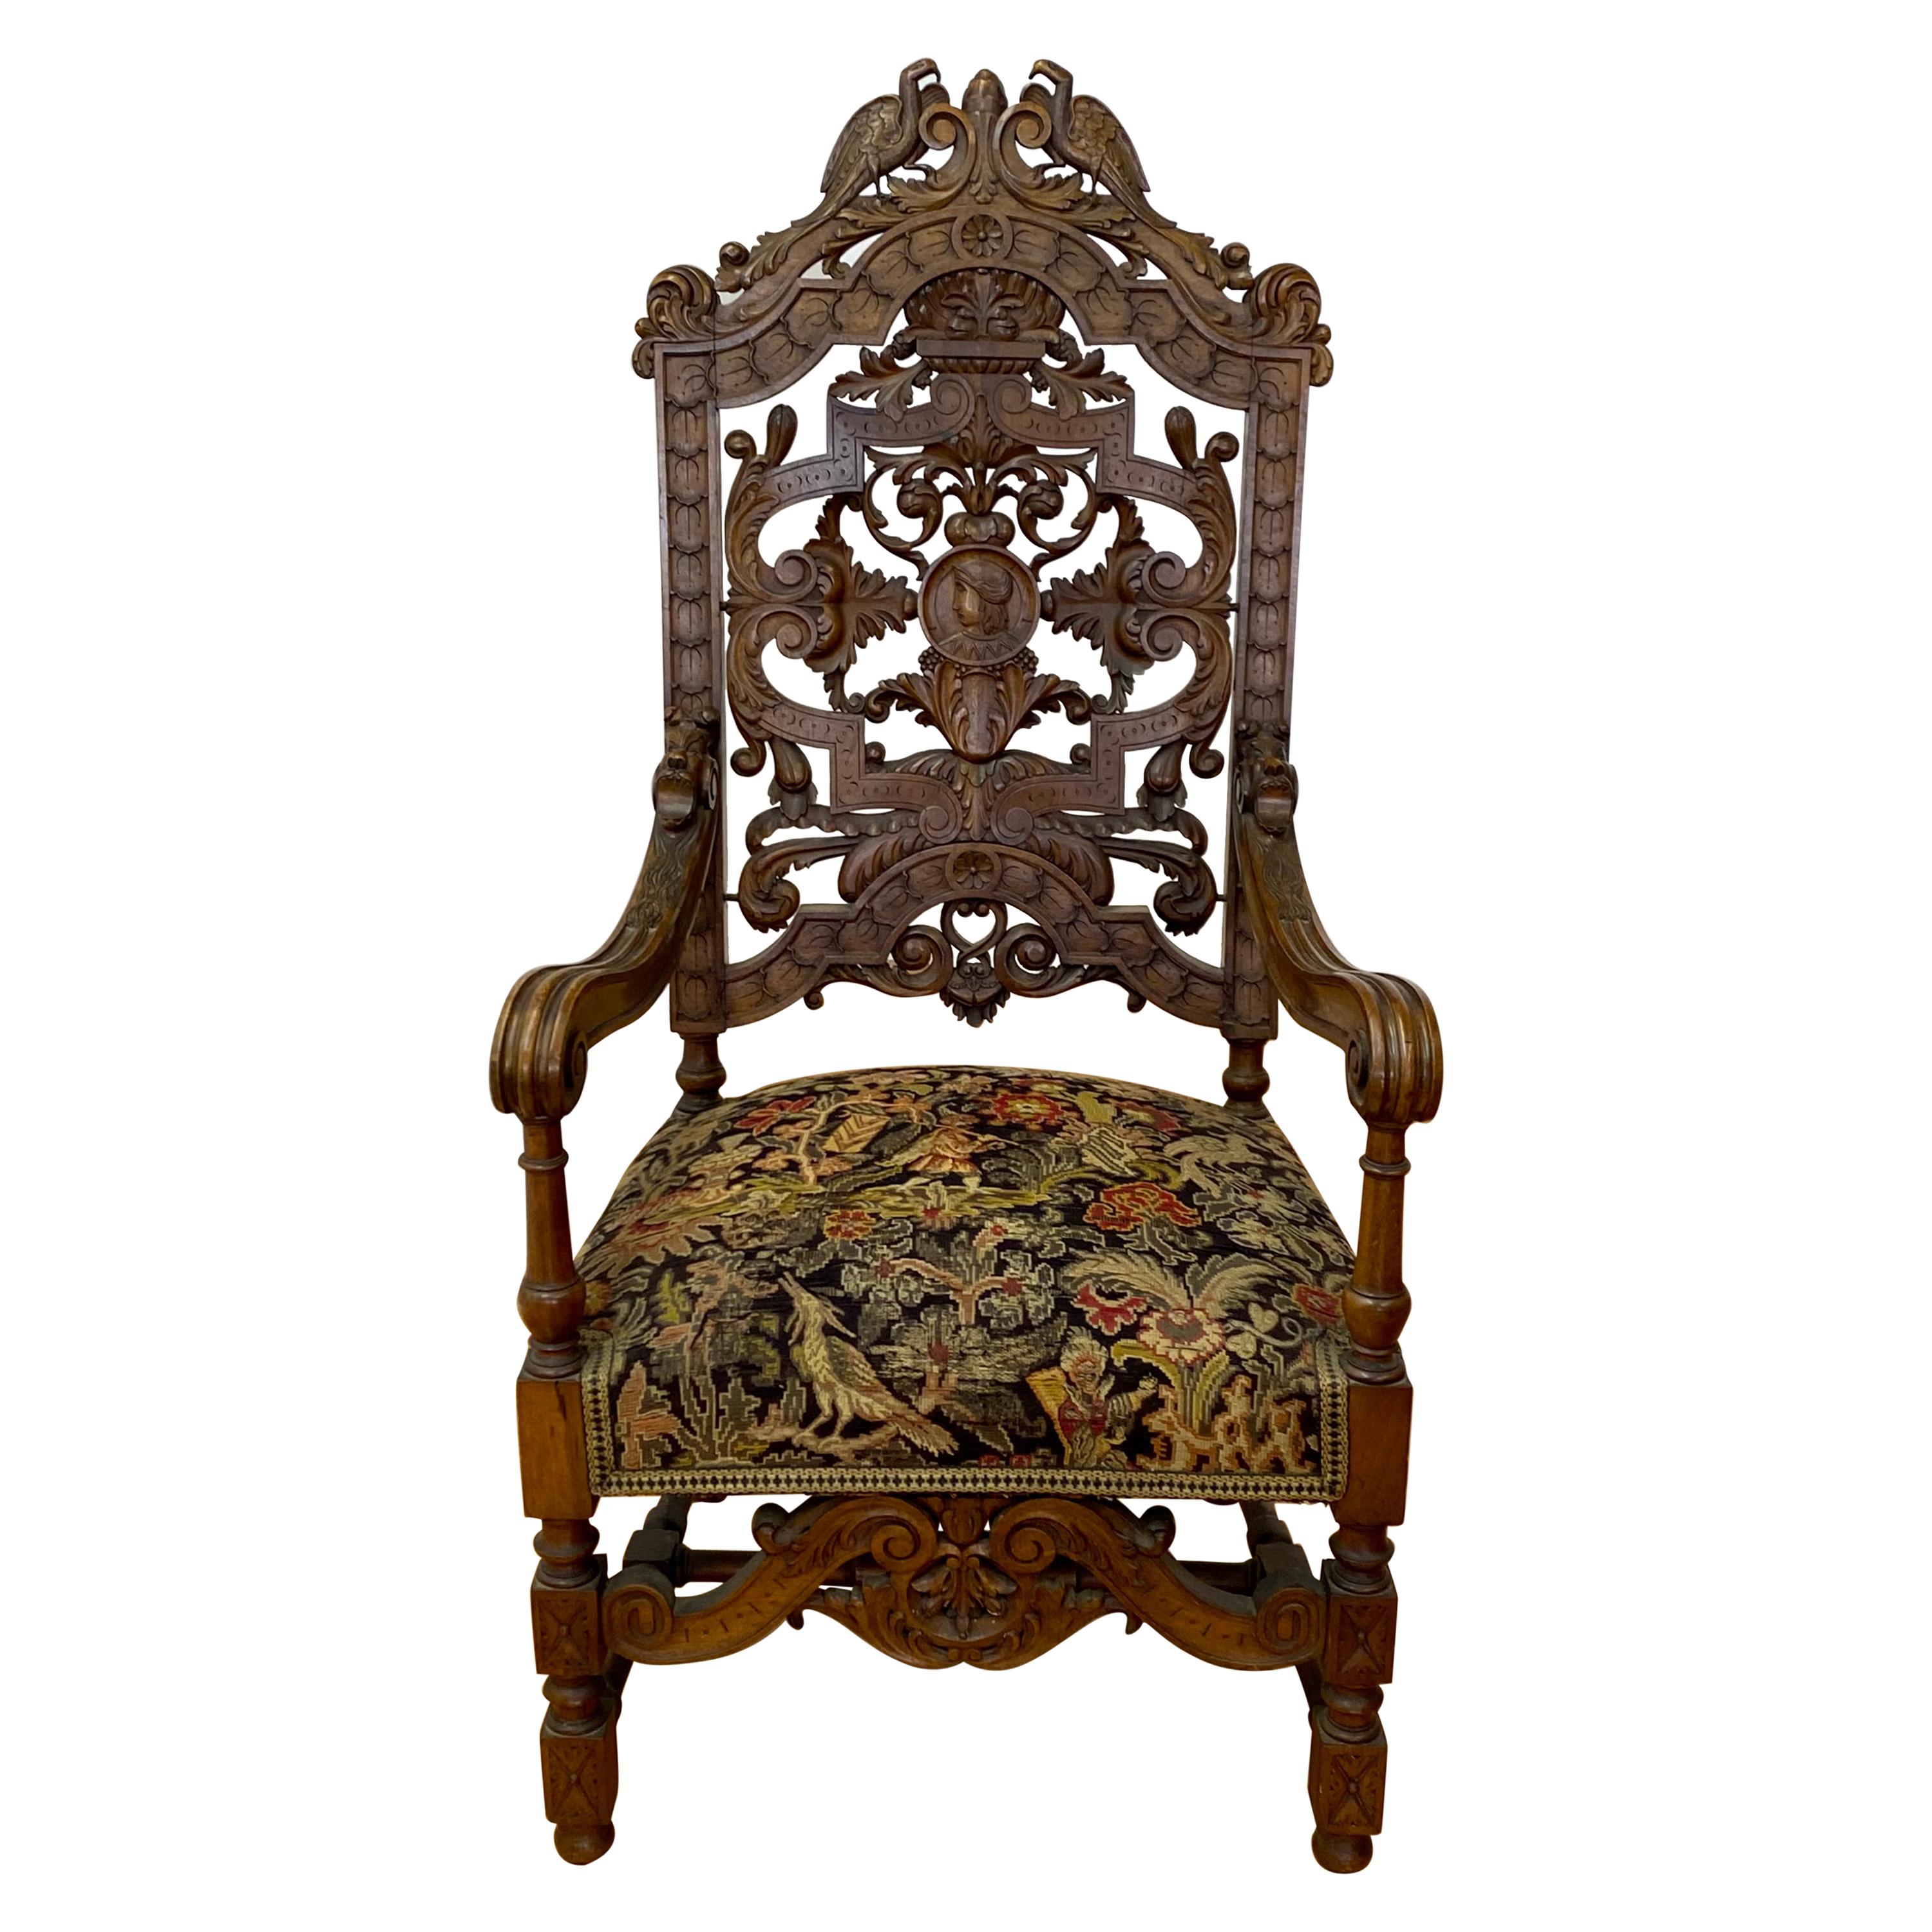 19th Century European Carved Walnut Arm Chair with Tapestry Upholstery